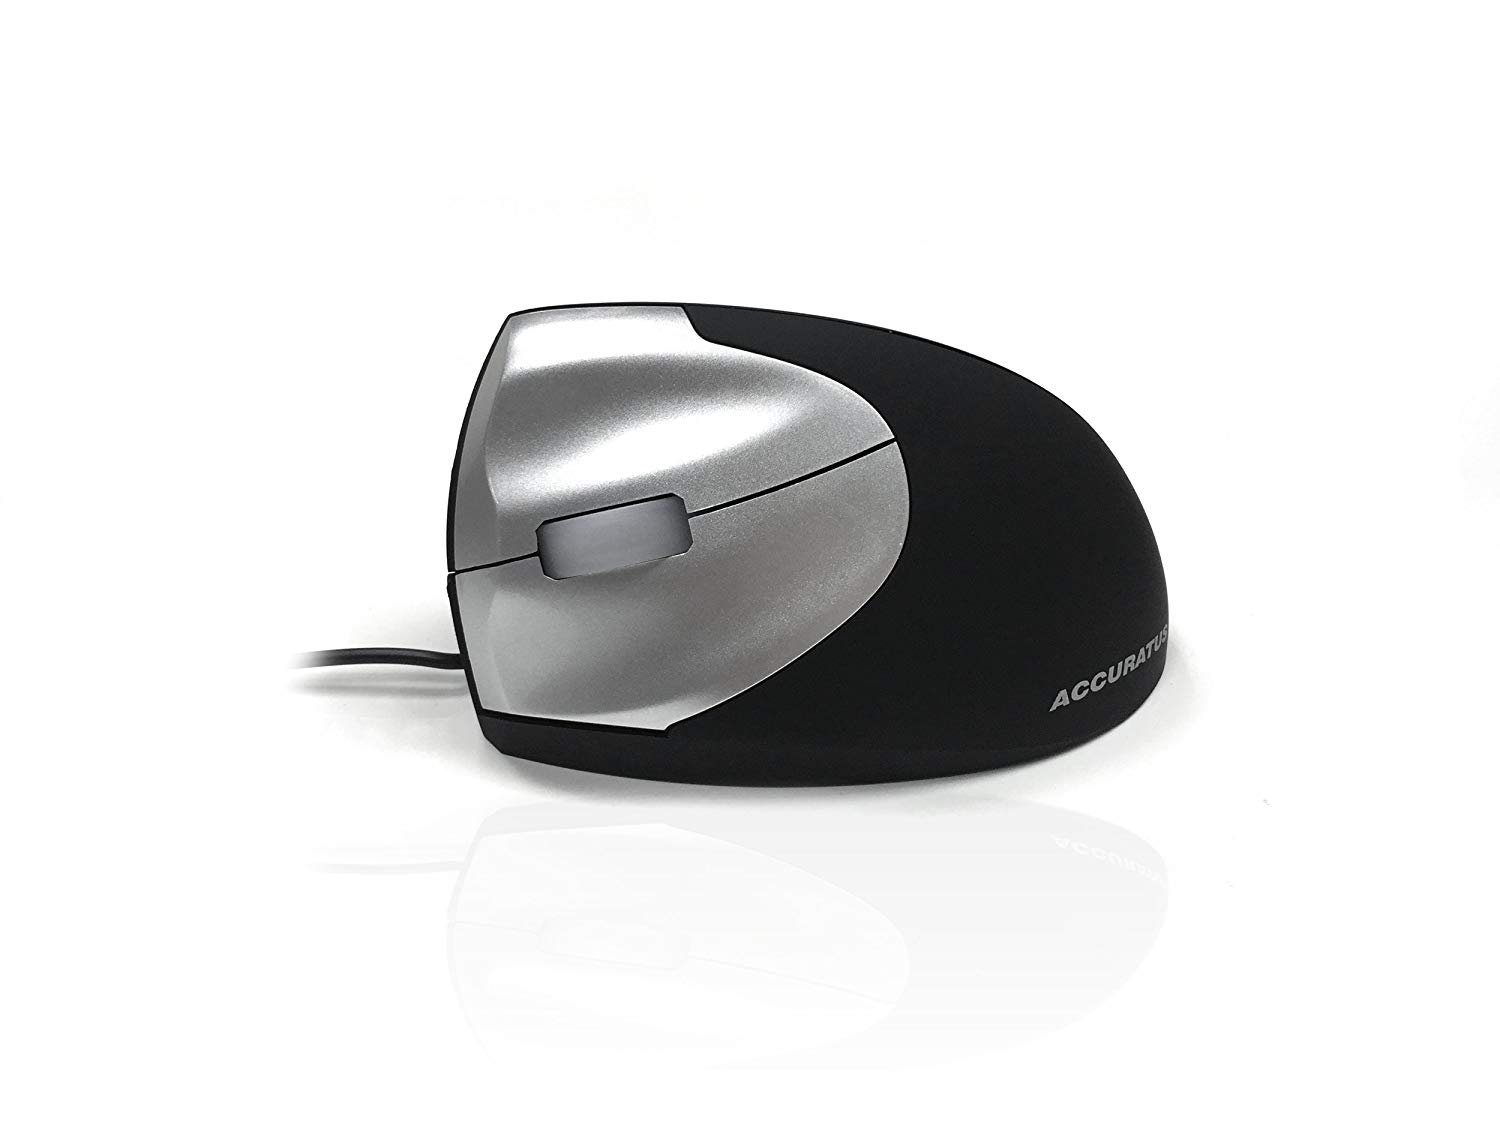 Left Handed Upright Mouse 2